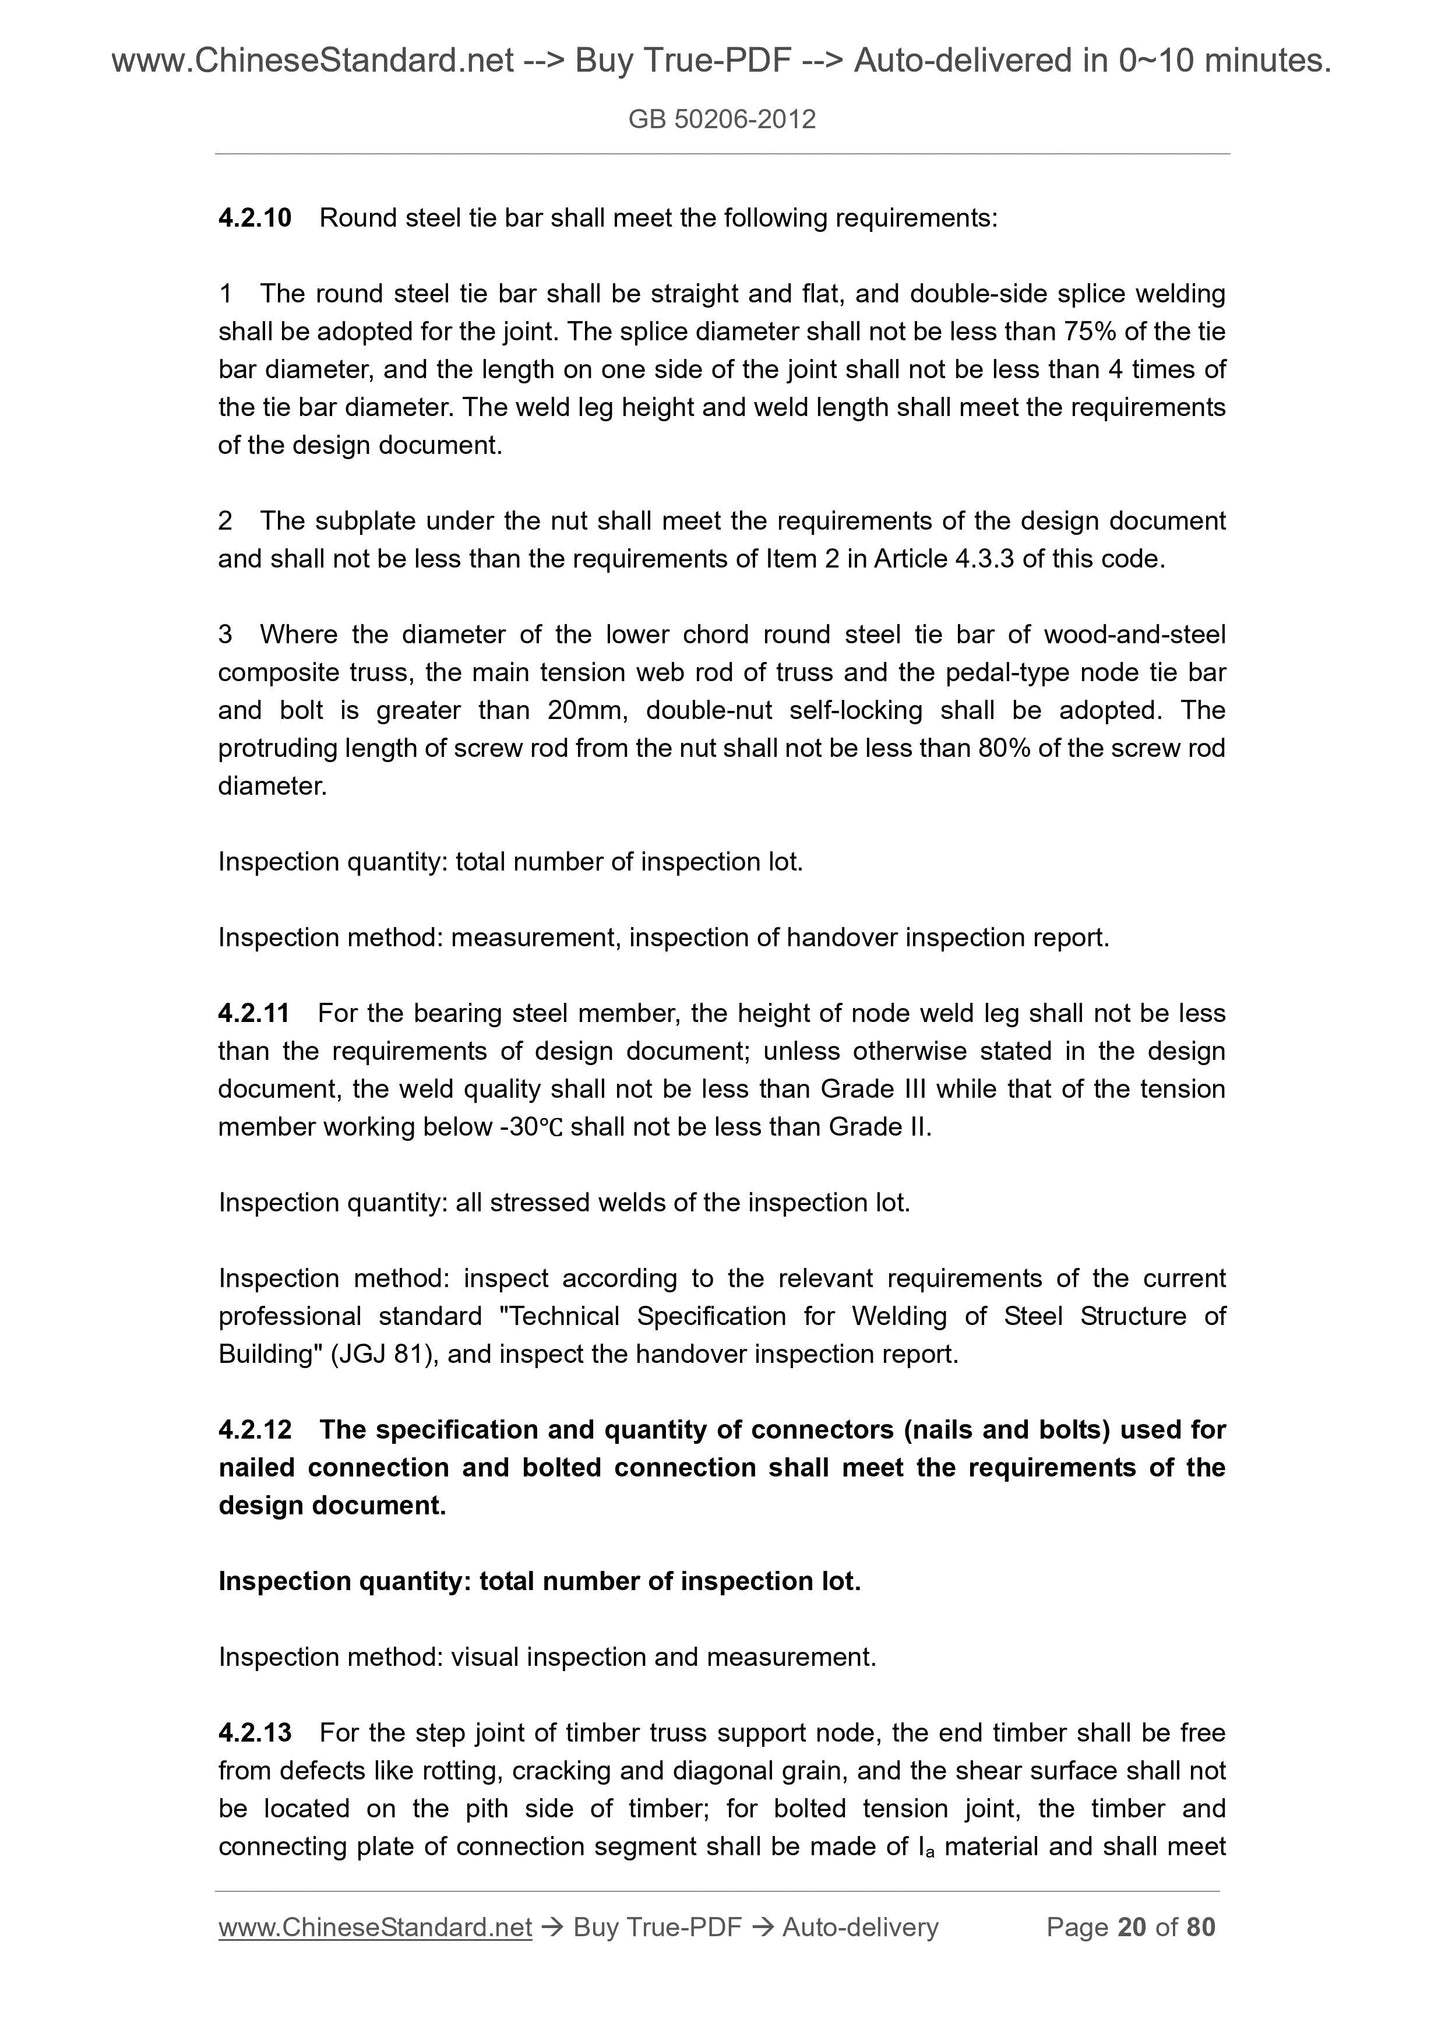 GB 50206-2012 Page 10